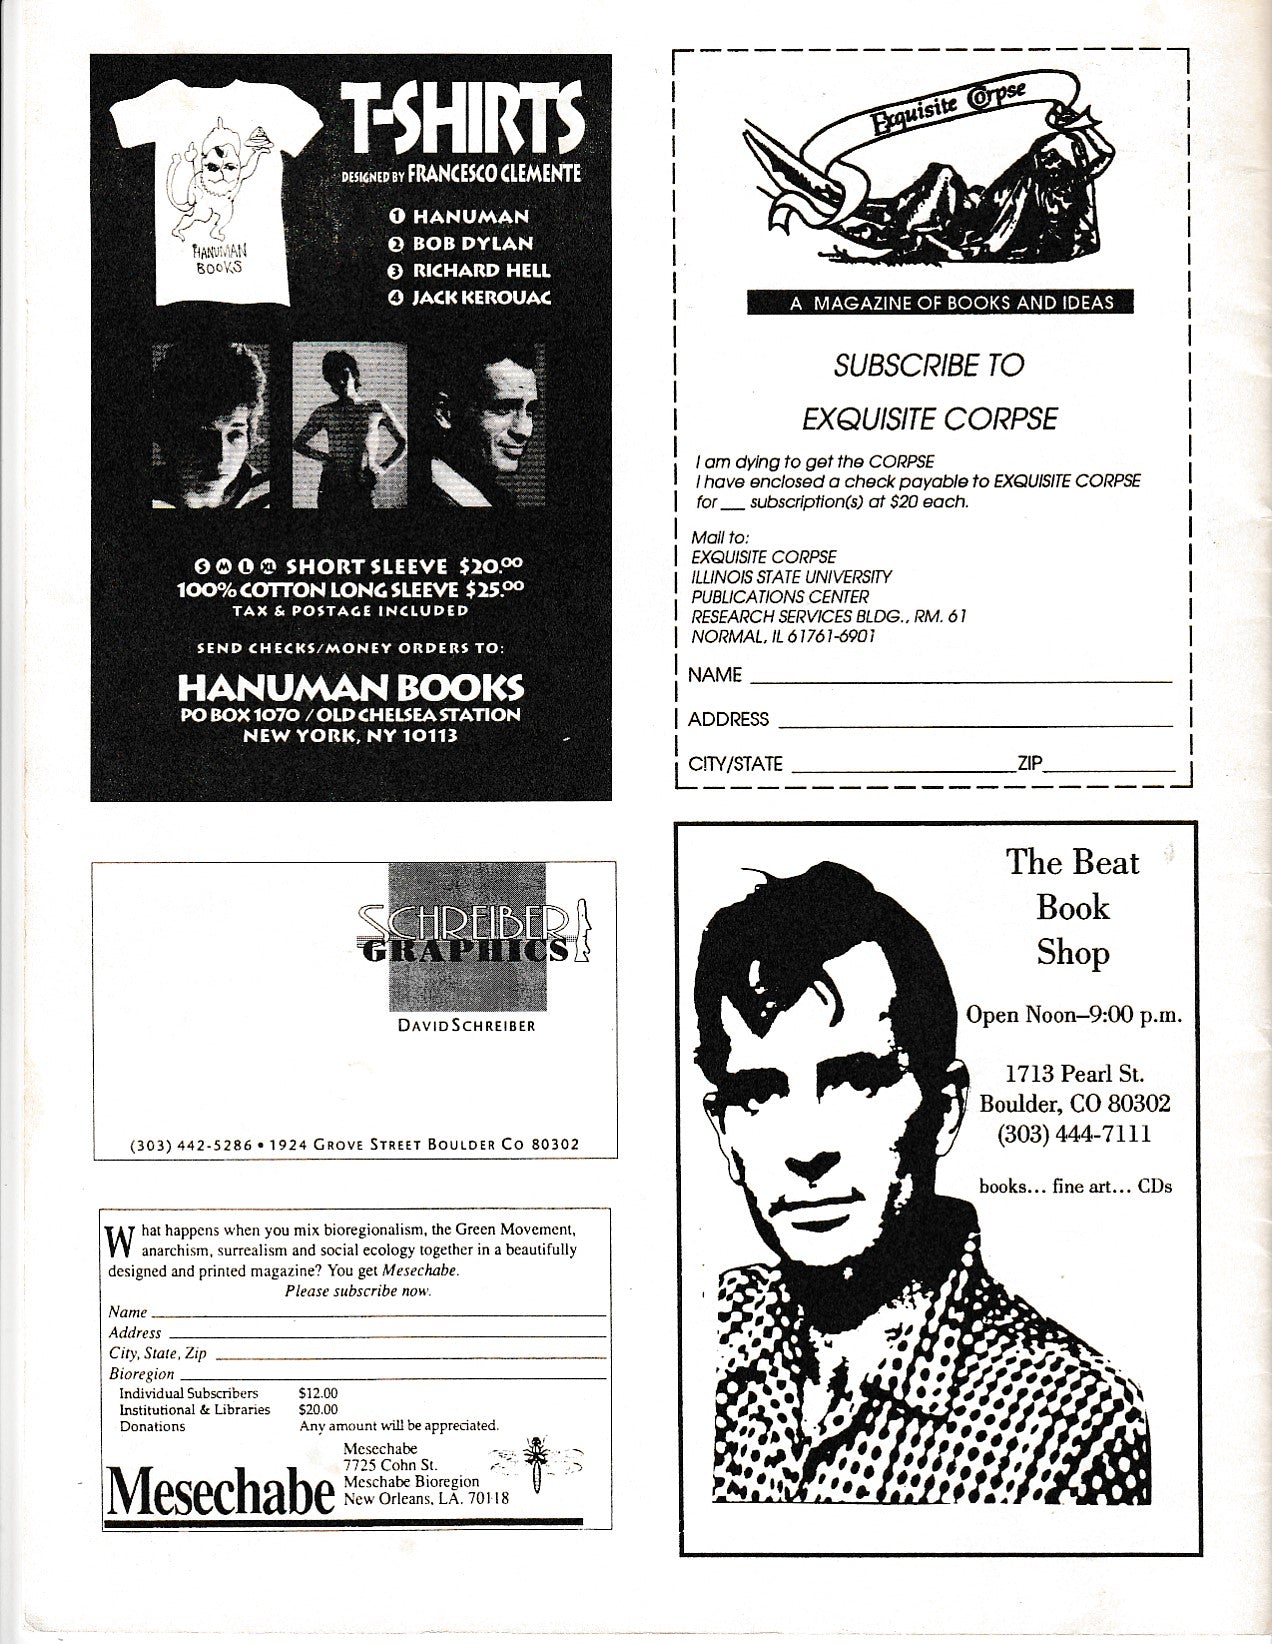 The New Censorship April 1992: Six Uncollected, 11 First Appearance Charles Bukowski Poems (20 Total): Entire Issue Devoted to Drawings & Poems by Charles Bukowski